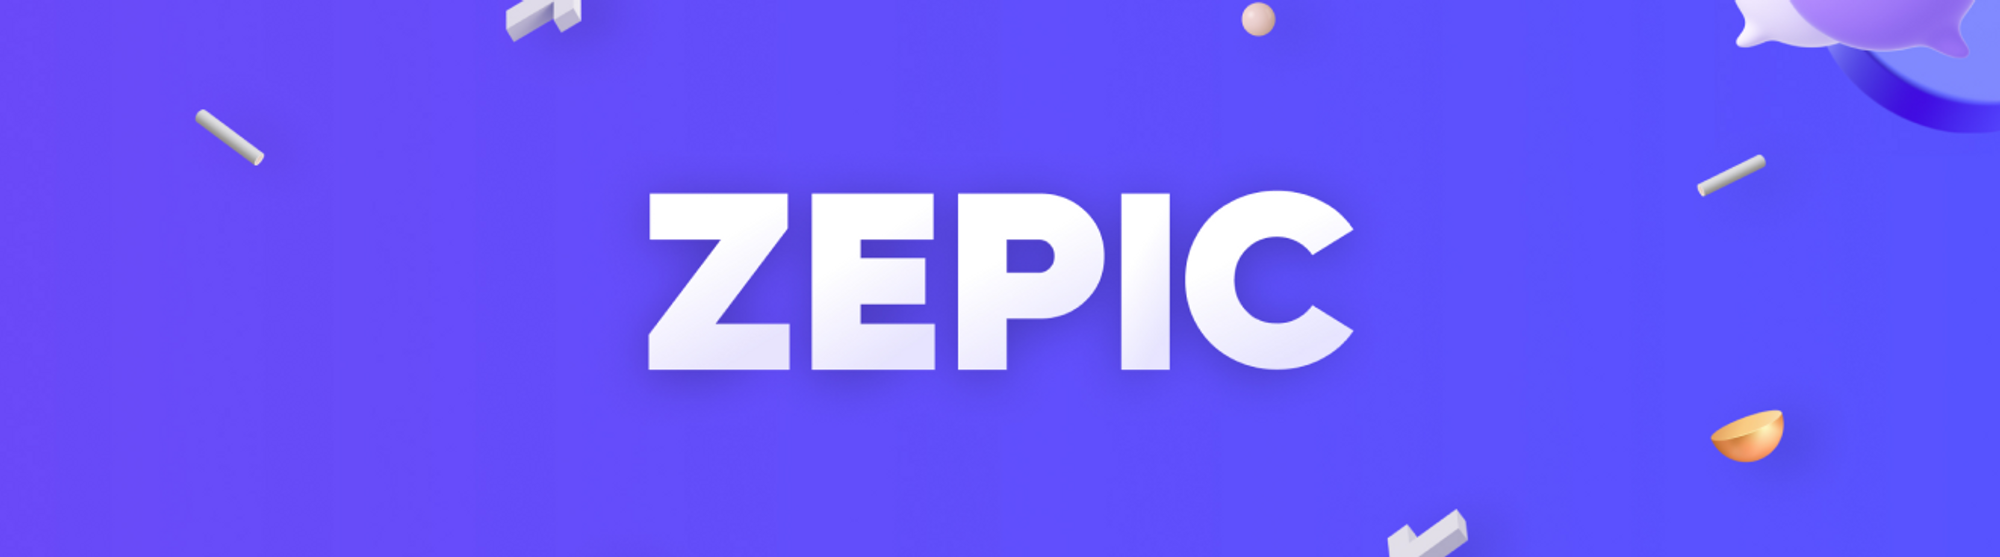 Zepic Cover Image